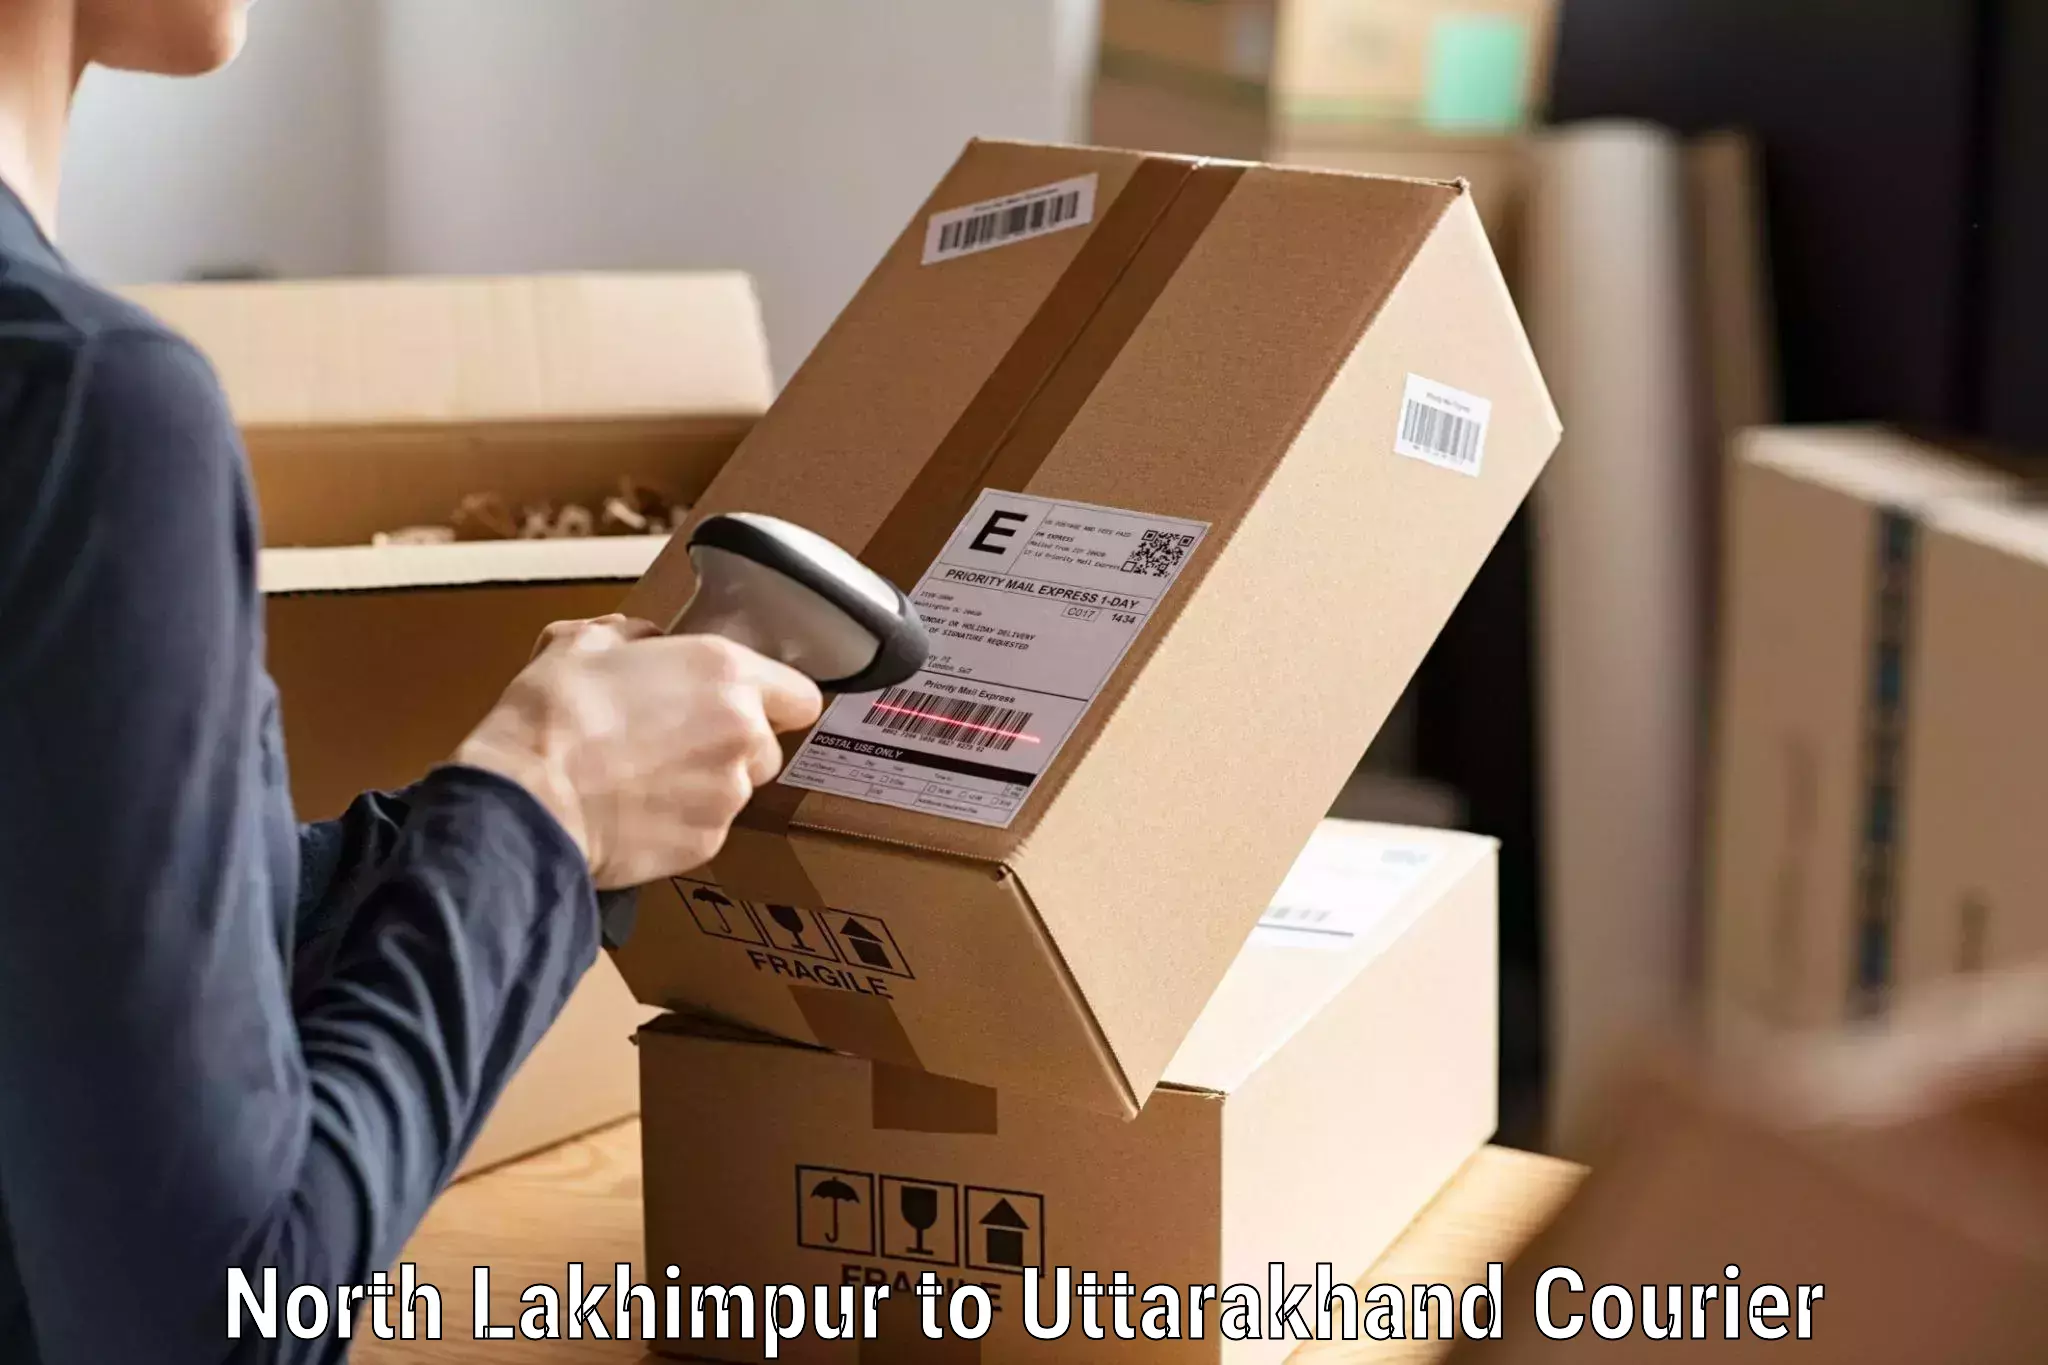 Same-day delivery options in North Lakhimpur to Rudraprayag